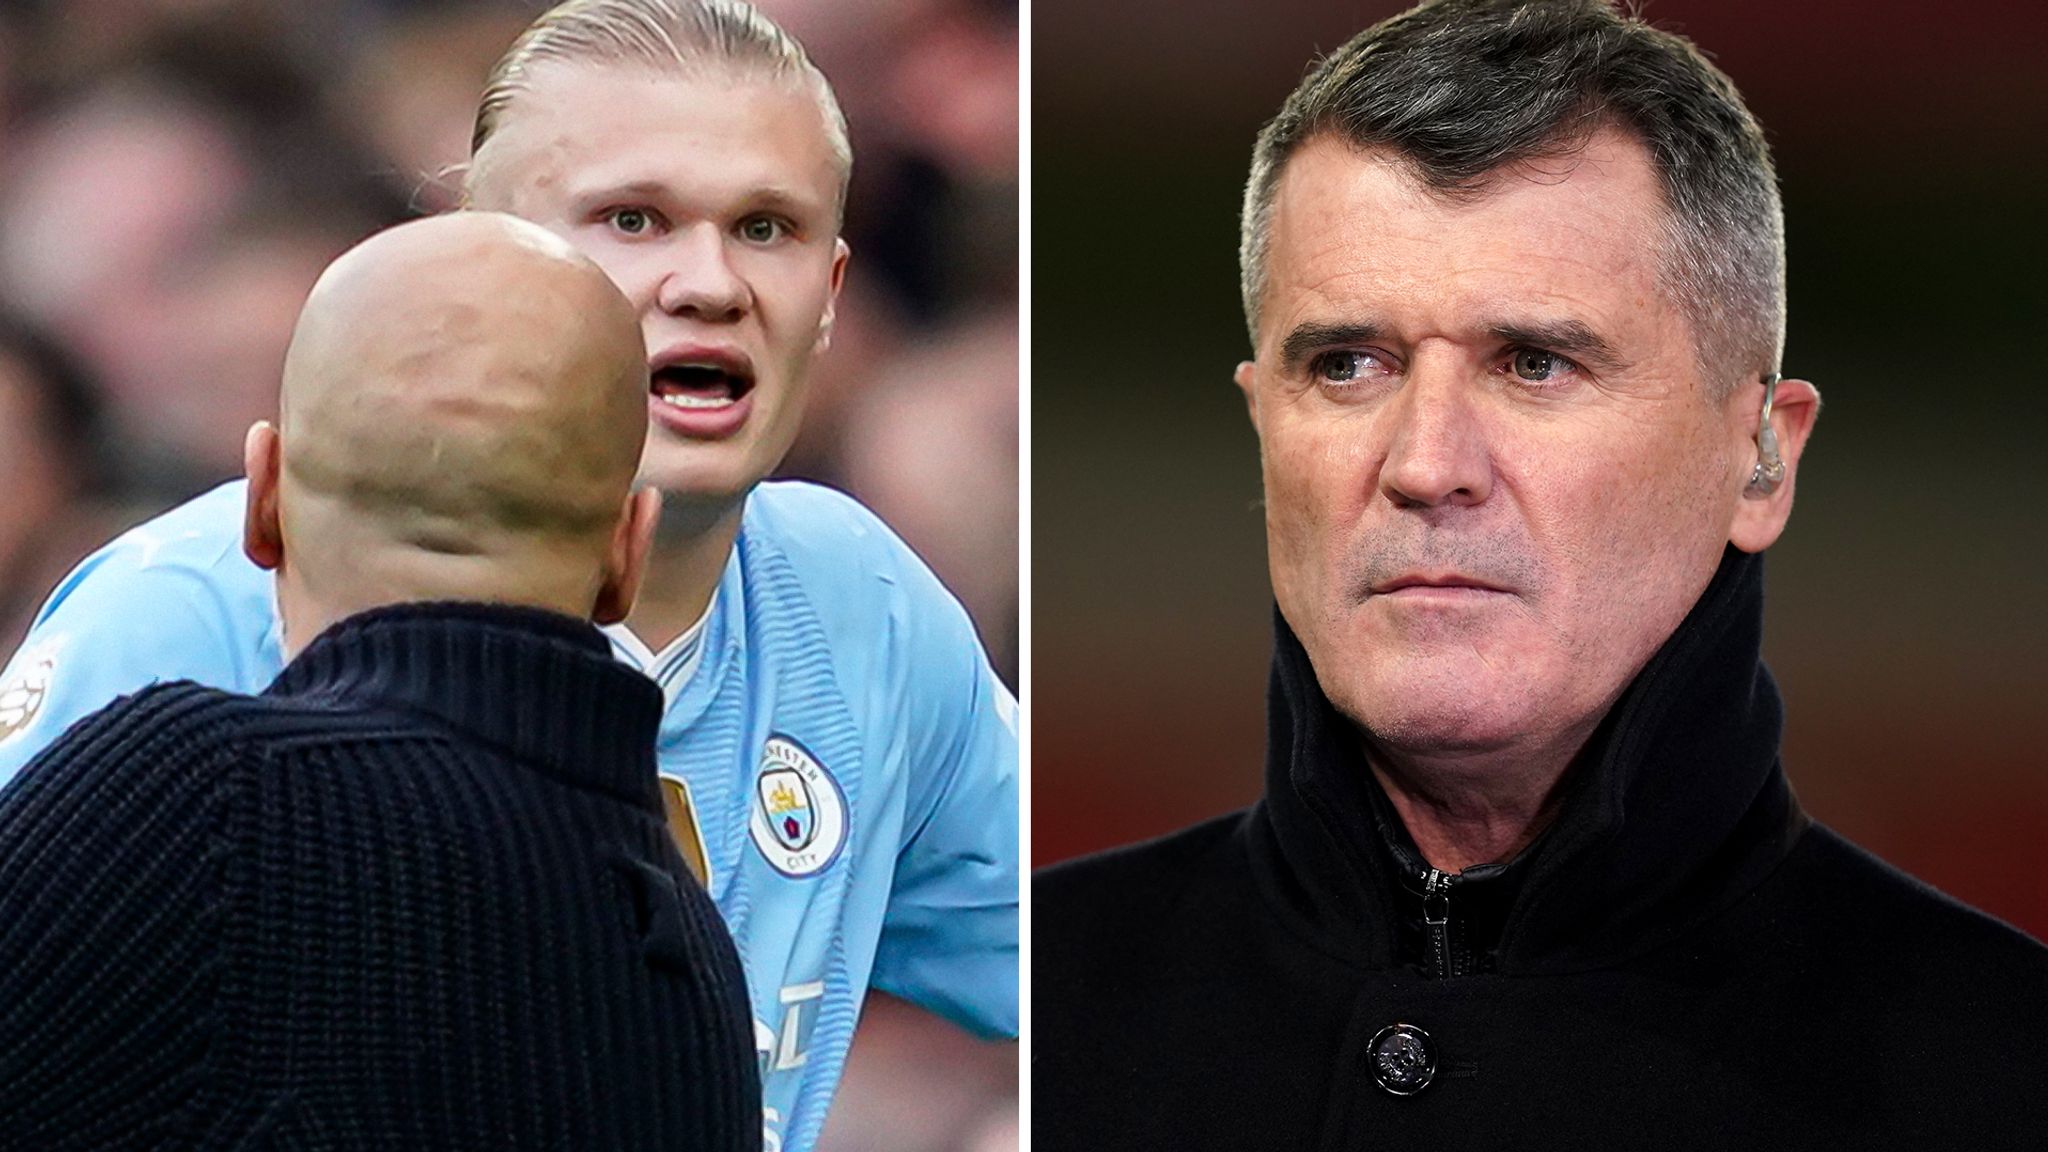 Erling Haaland's Frustration and Roy Keane's Critique Ignite Debate After Four-Goal Extravaganza